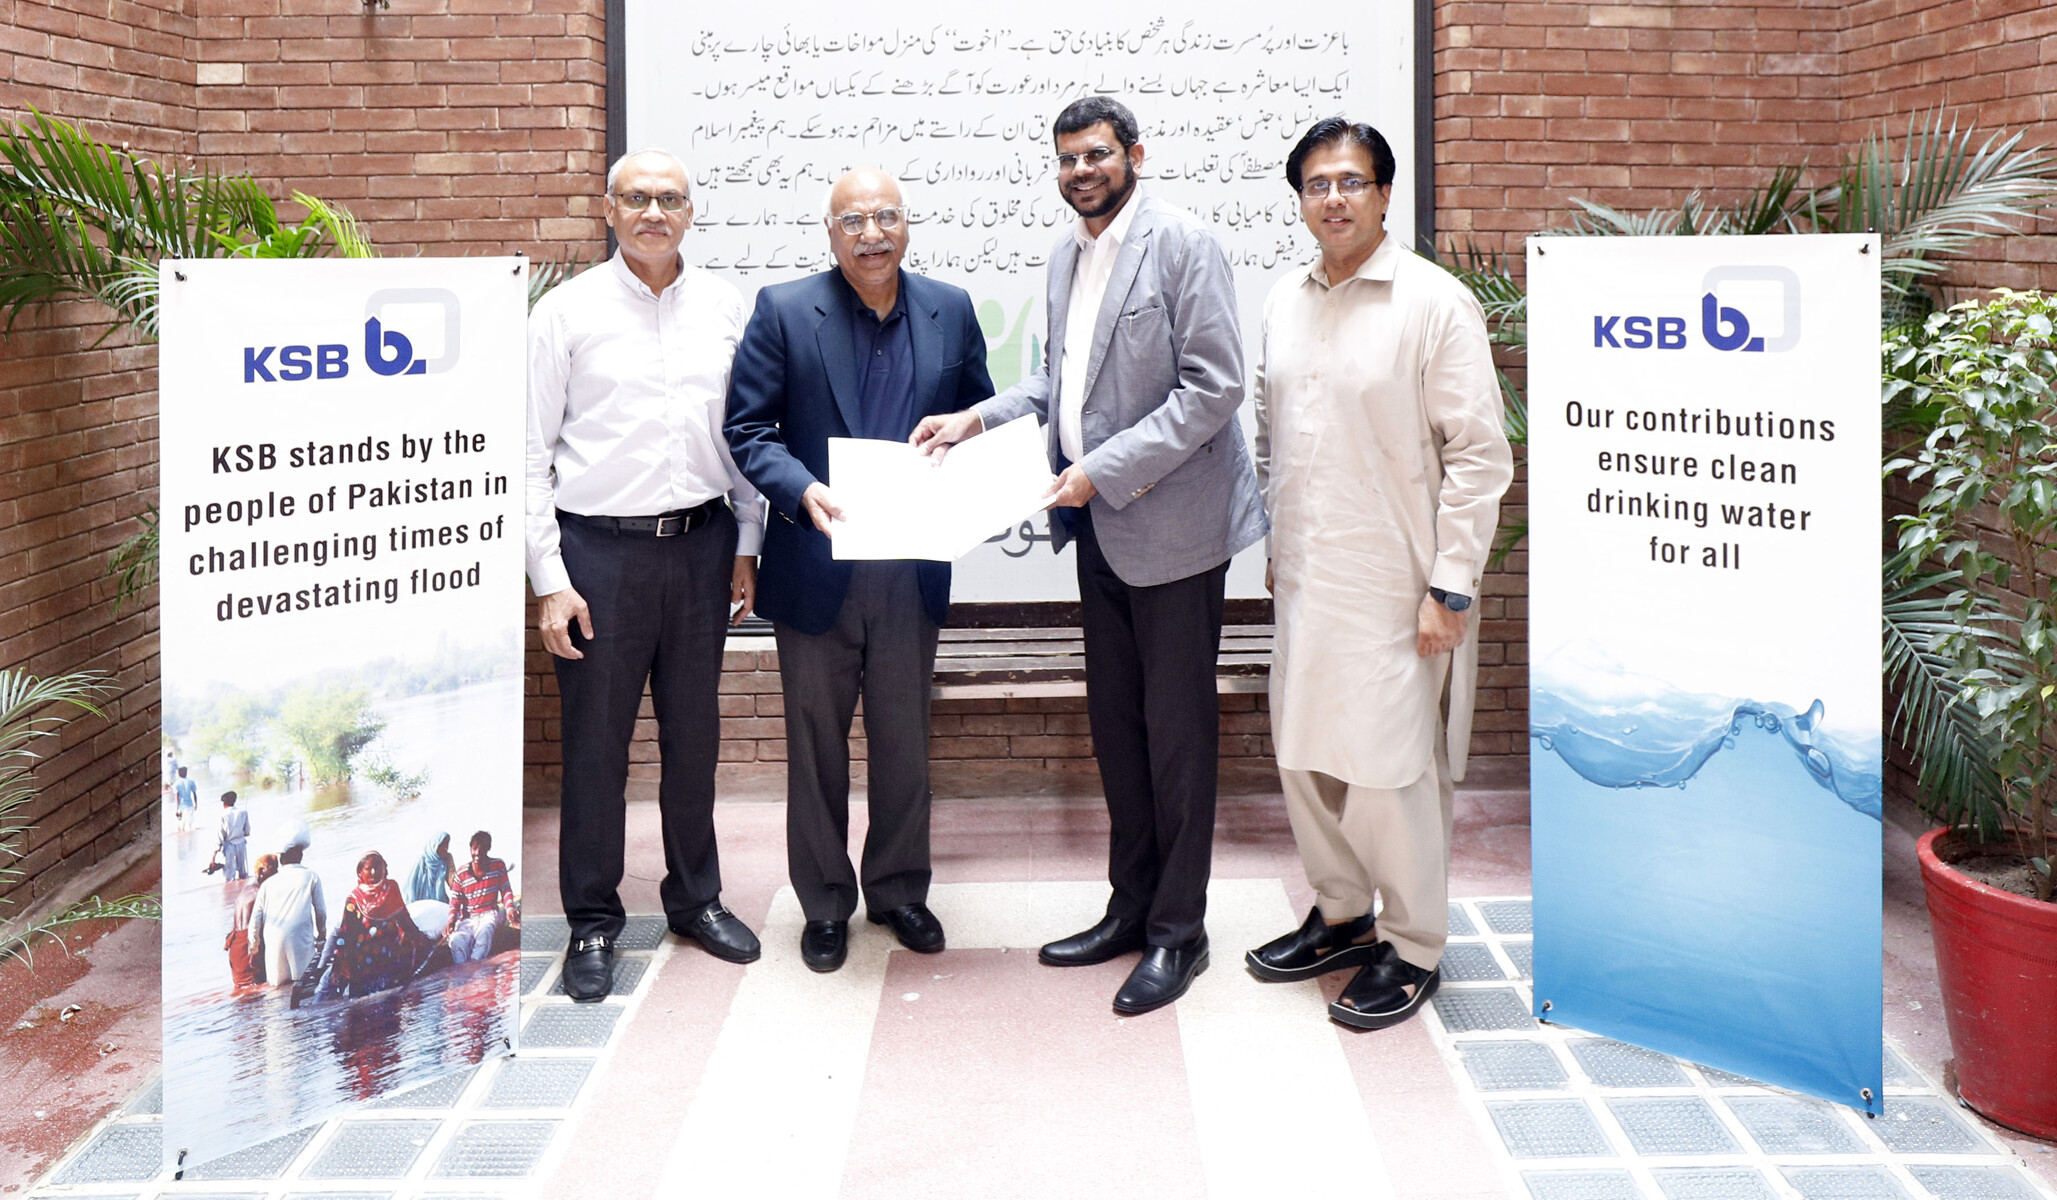 Imran Ghani (2nd from right), Head of KSB Pumps Company Limited in Lahore, presents part of the cash